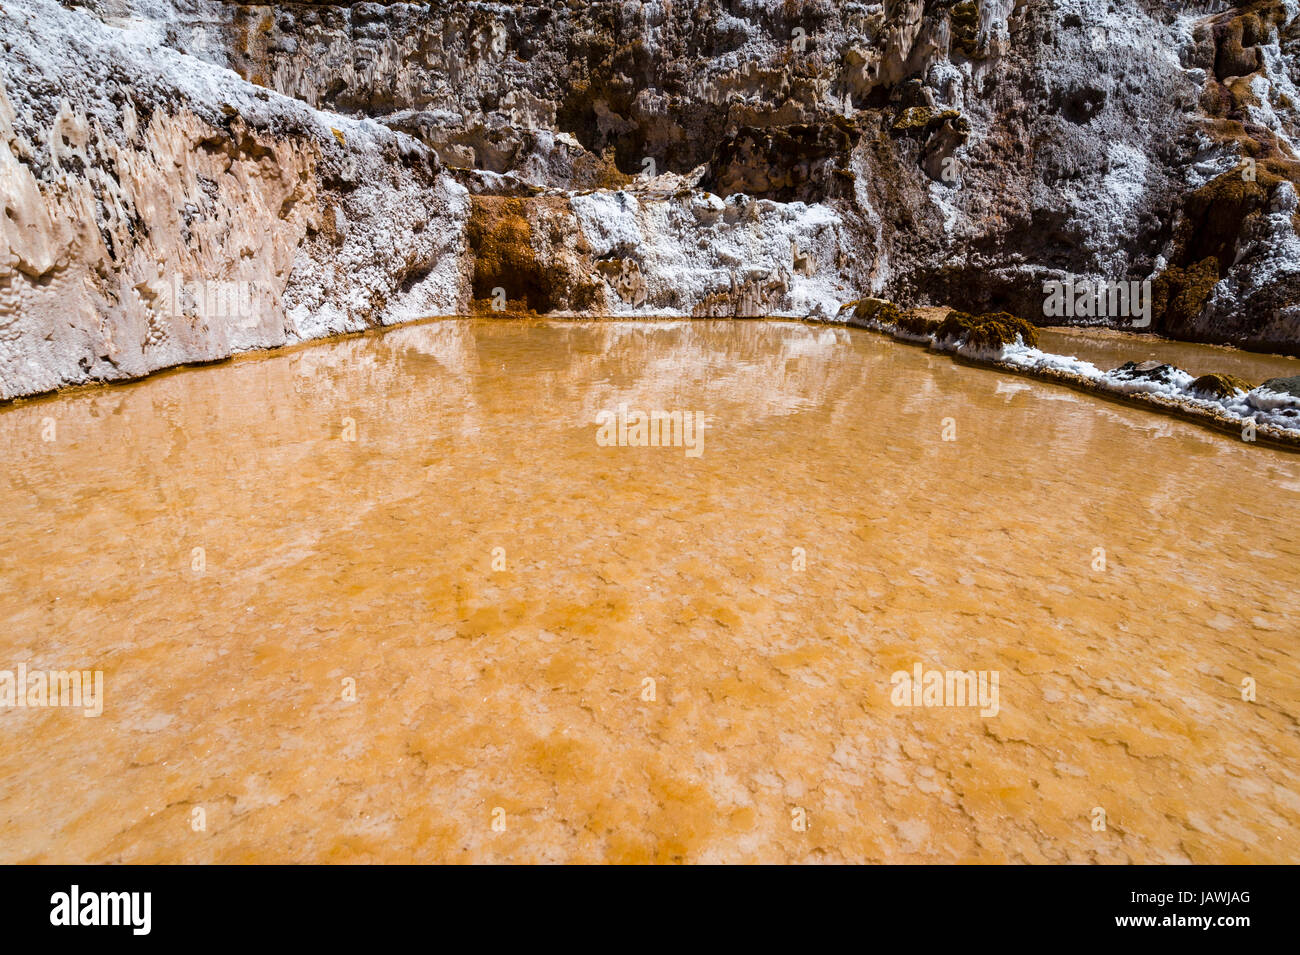 An Inca salt mine made up of salty spring water ponds evaporating. Stock Photo